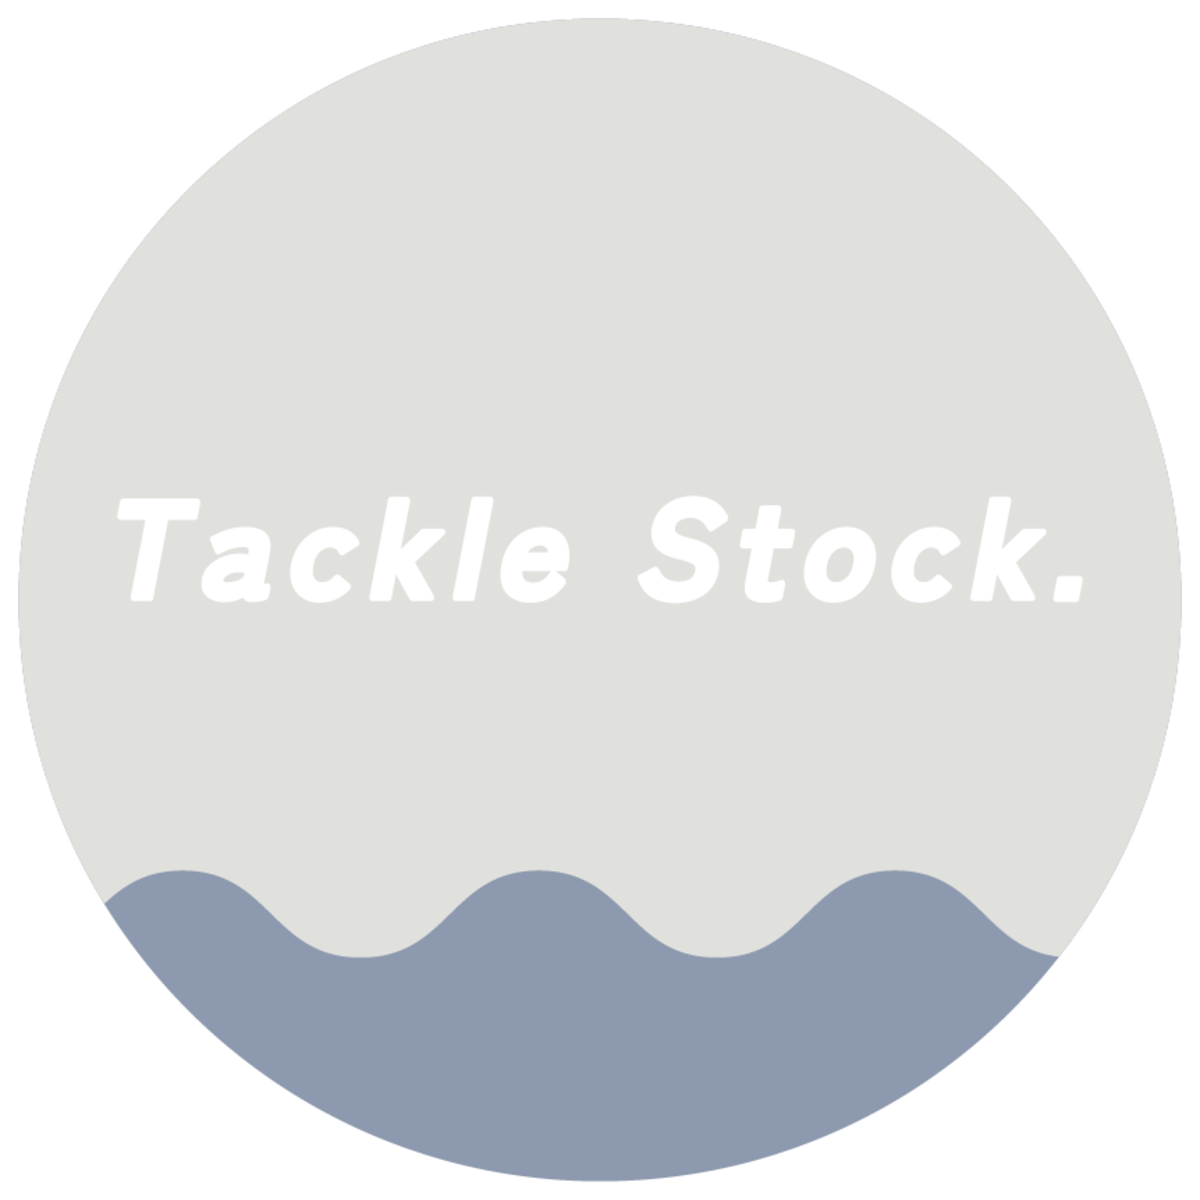 Tackle Stock (JDM tackles) powered by BASE